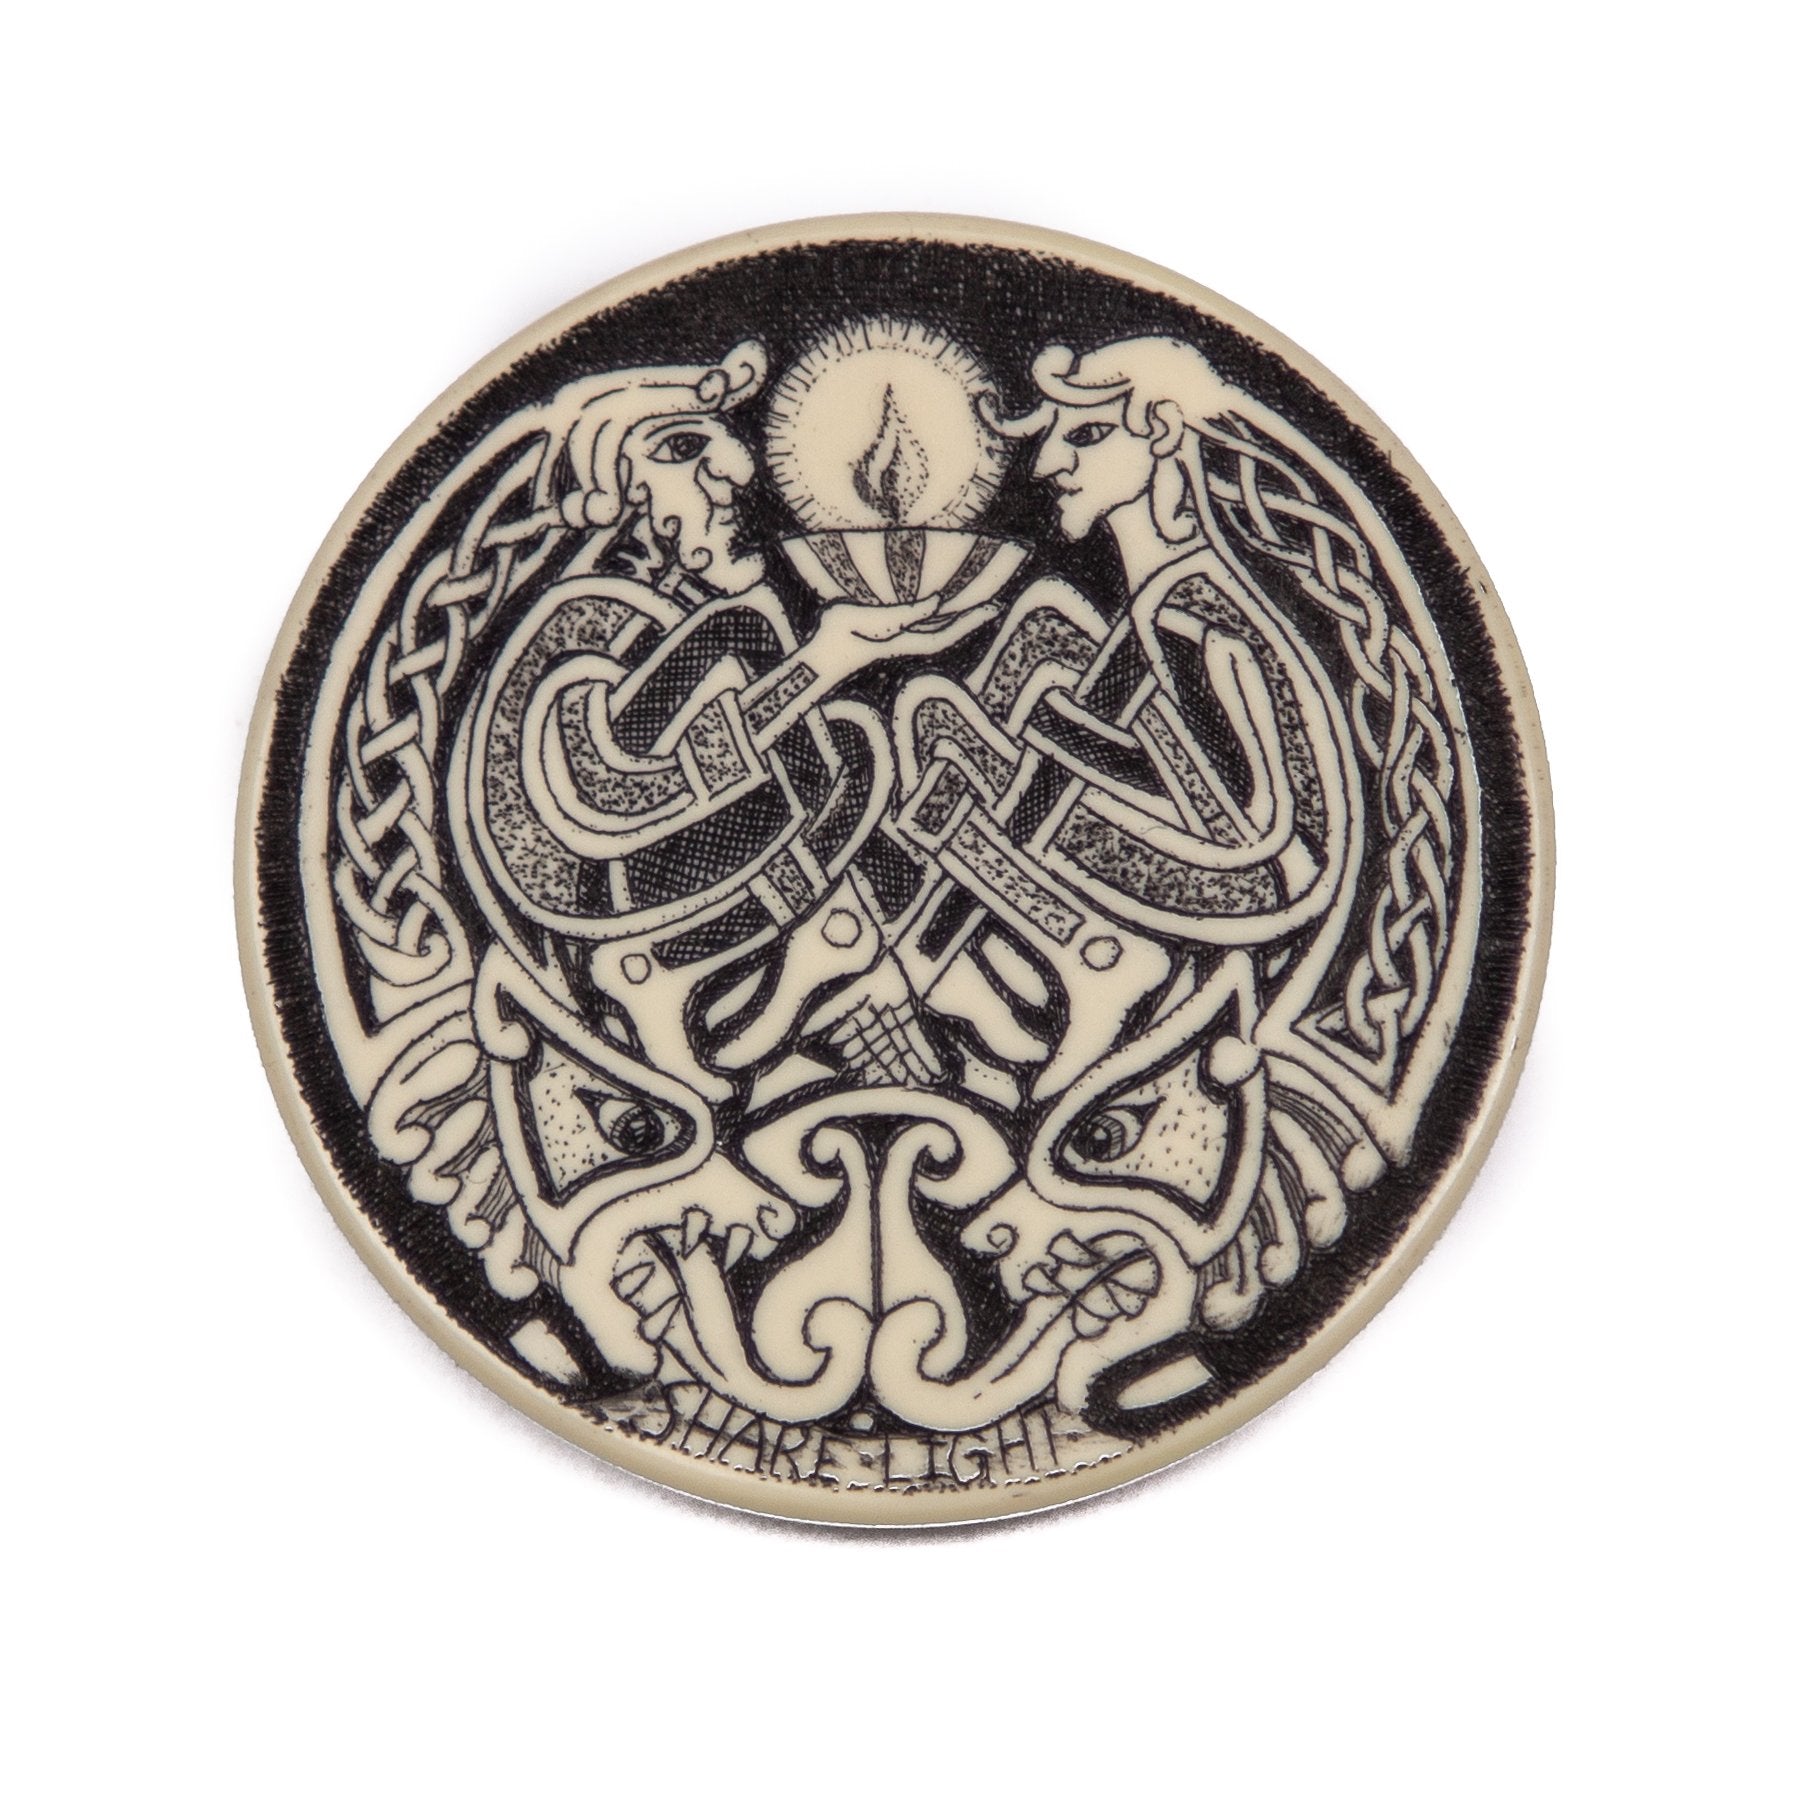 "Share Light and Chase the Dragons of Darkness" Money Clip